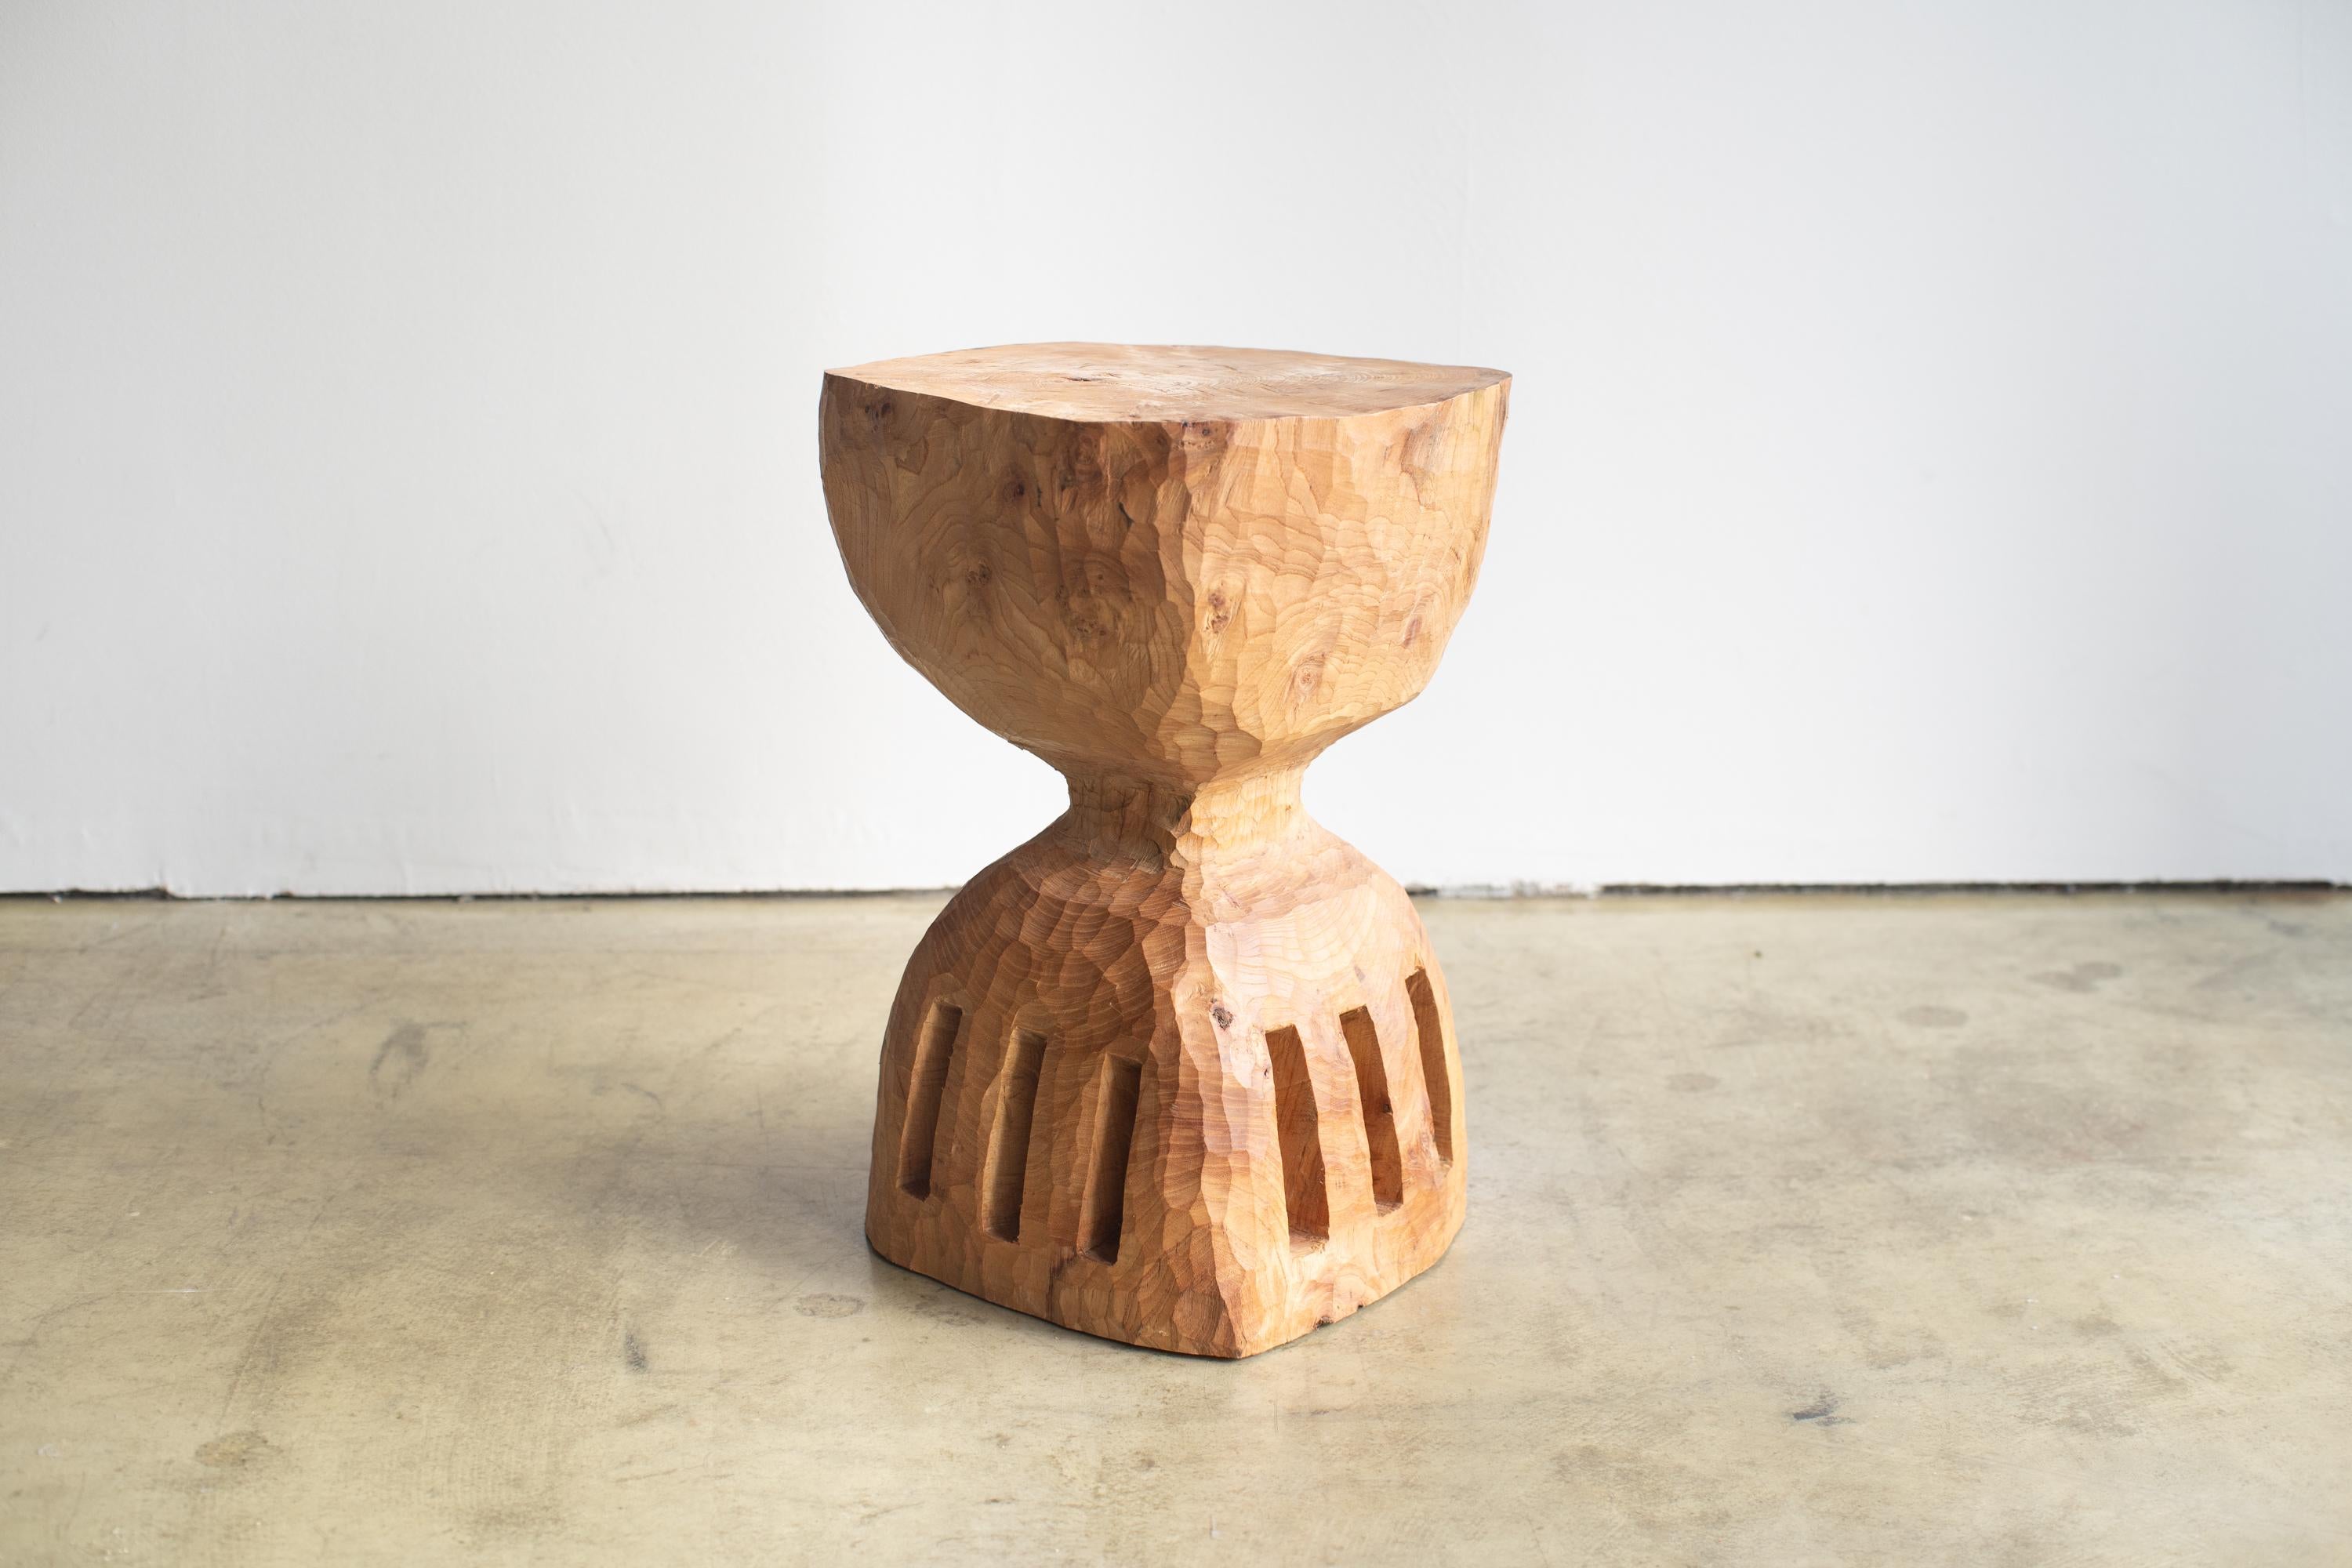 Hand-Carved Hiroyuki Nishimura and Zogei Furniture Sculptural Wood Stool8 Tribal Glamping For Sale